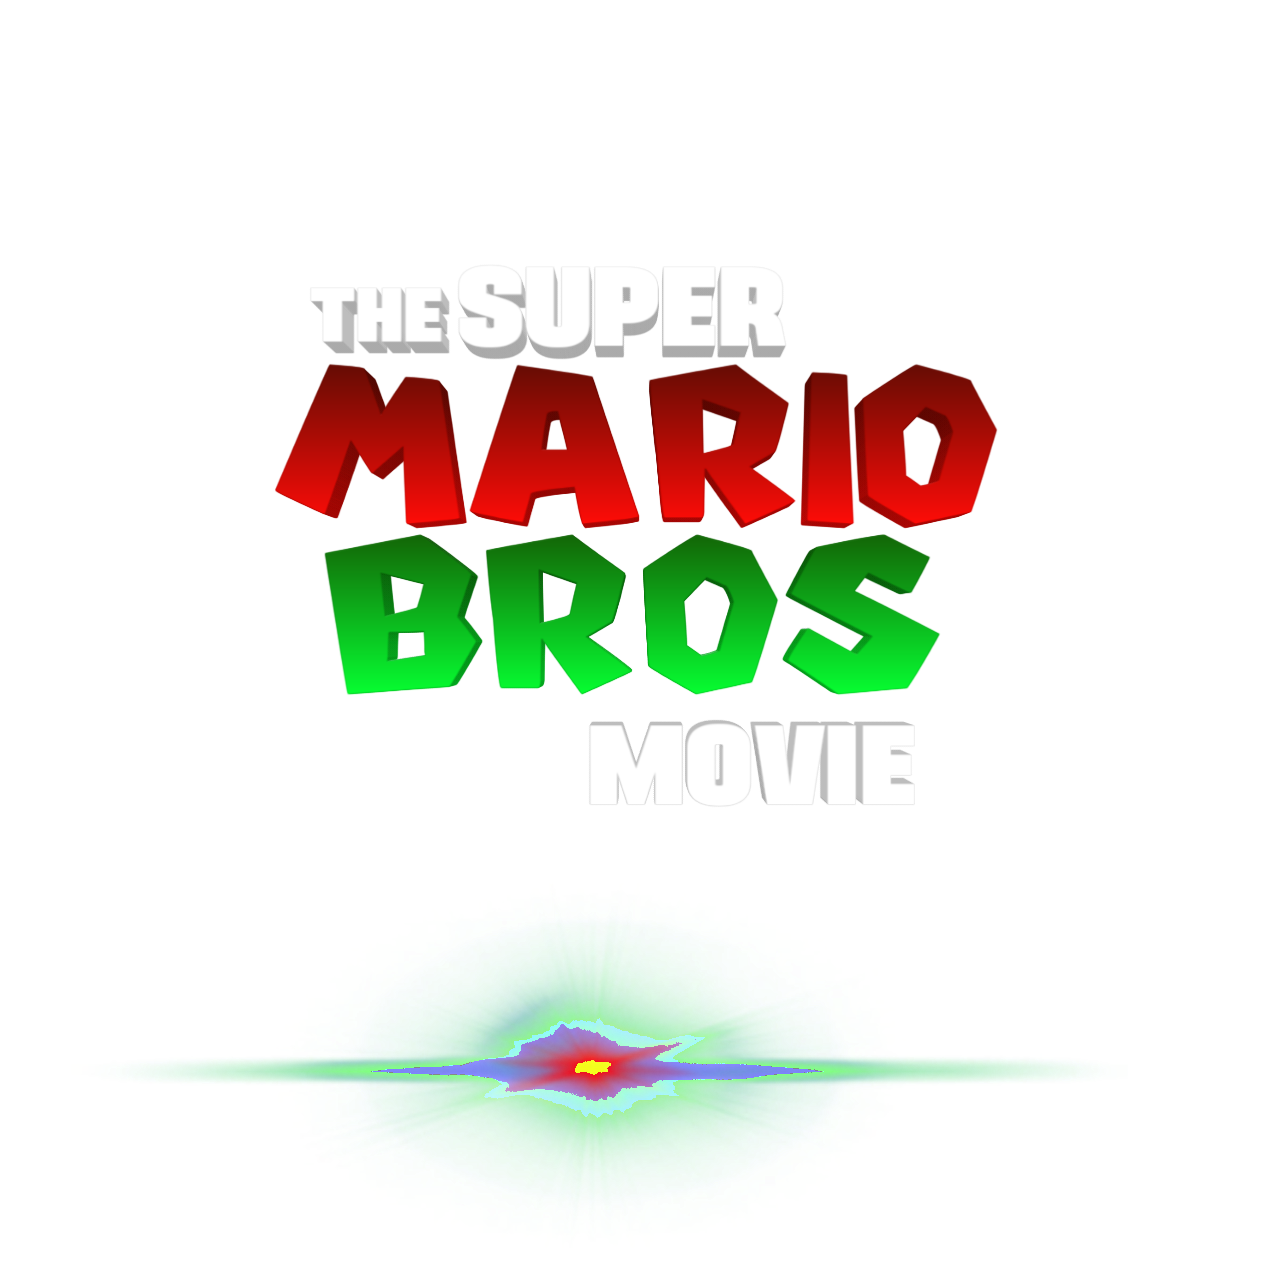 The Super Mario Bros Movie 2 (2025) Second Poster by lolthd on DeviantArt